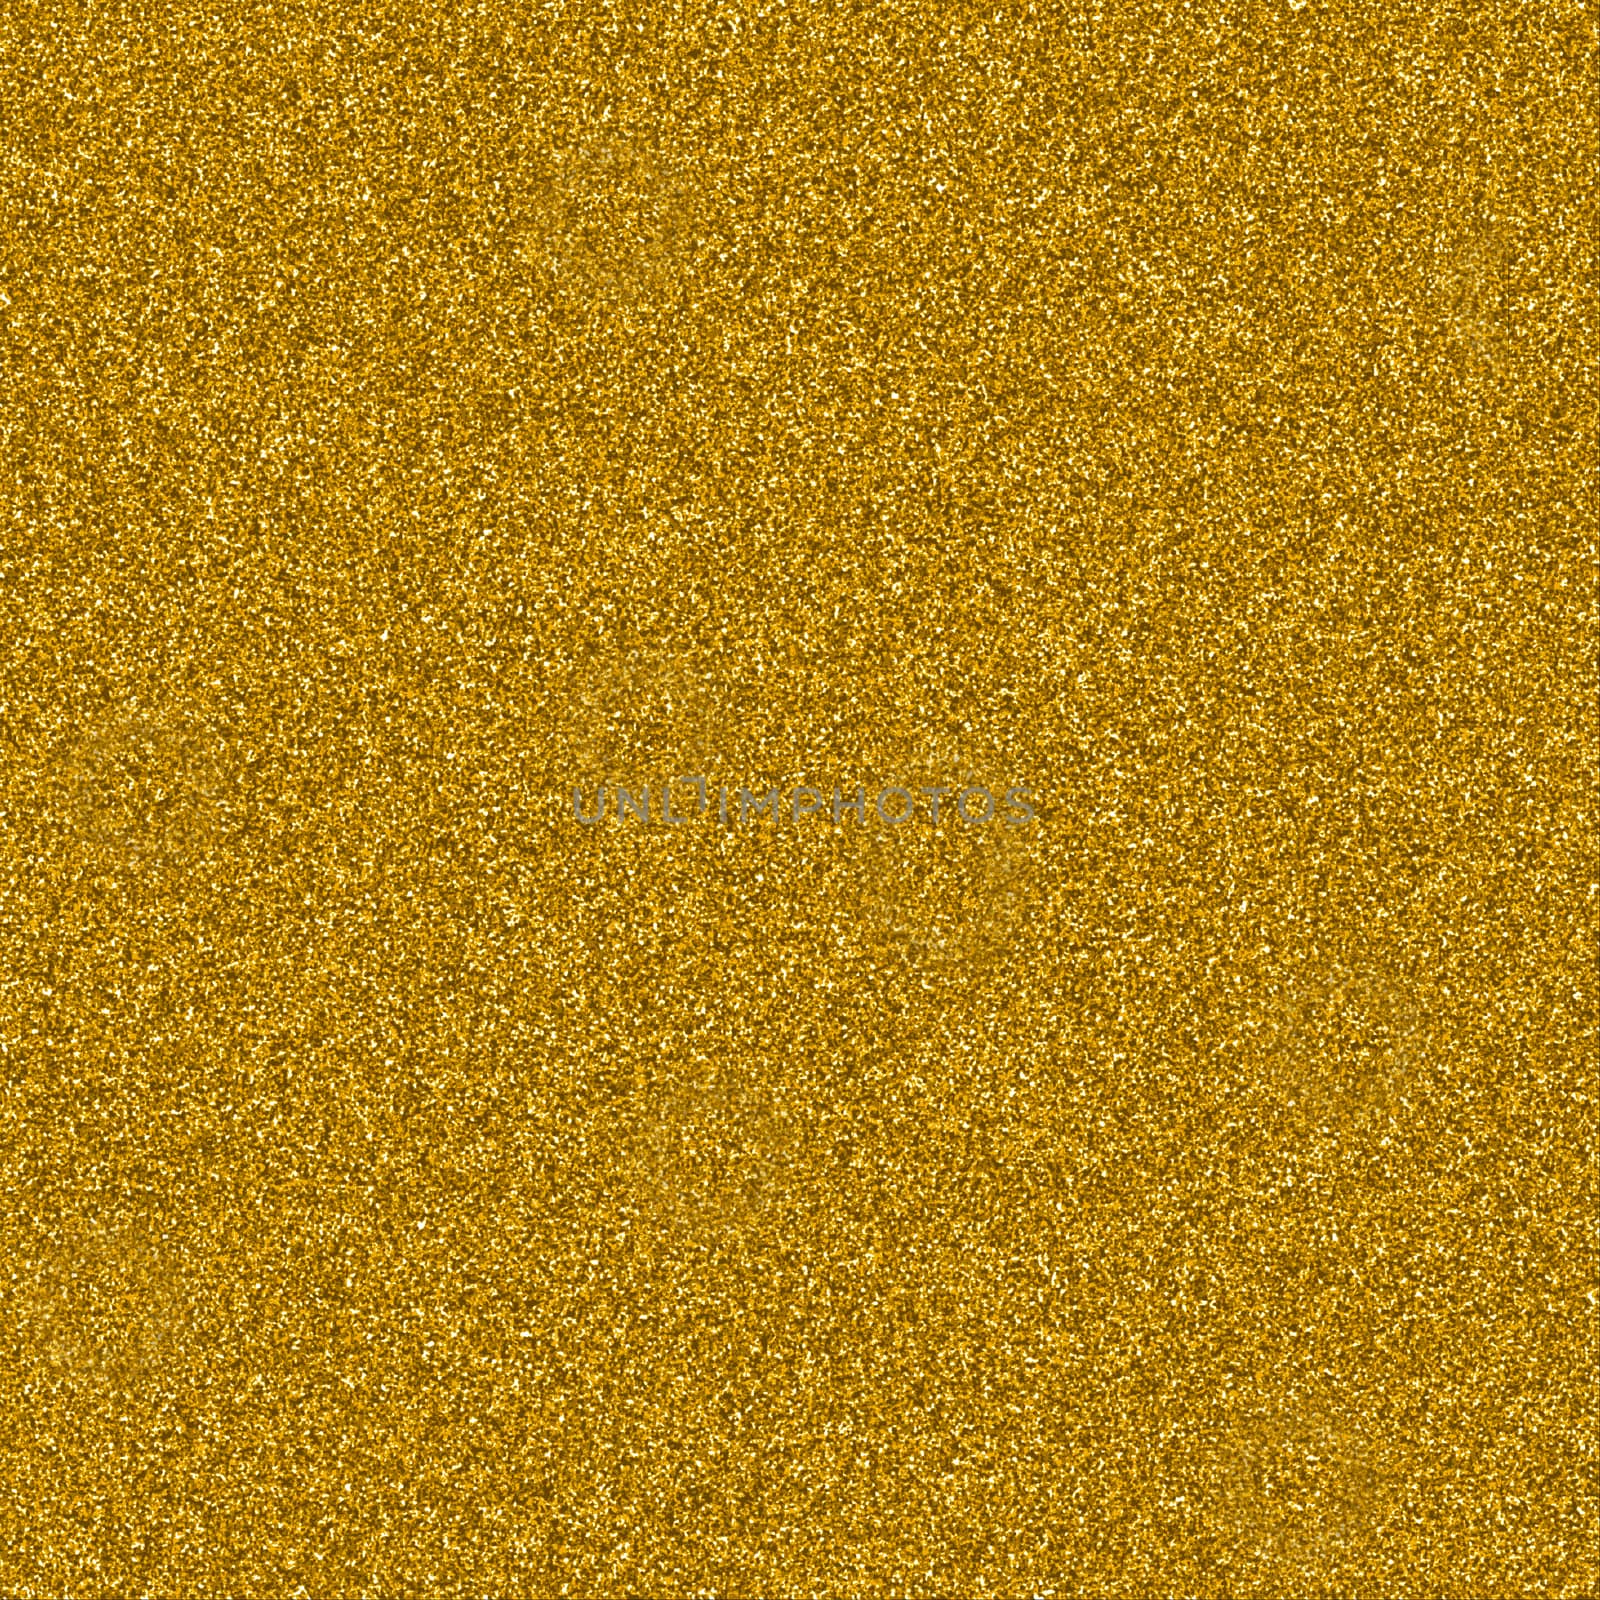 The Golden surface with a rough textured surface.Texture or background